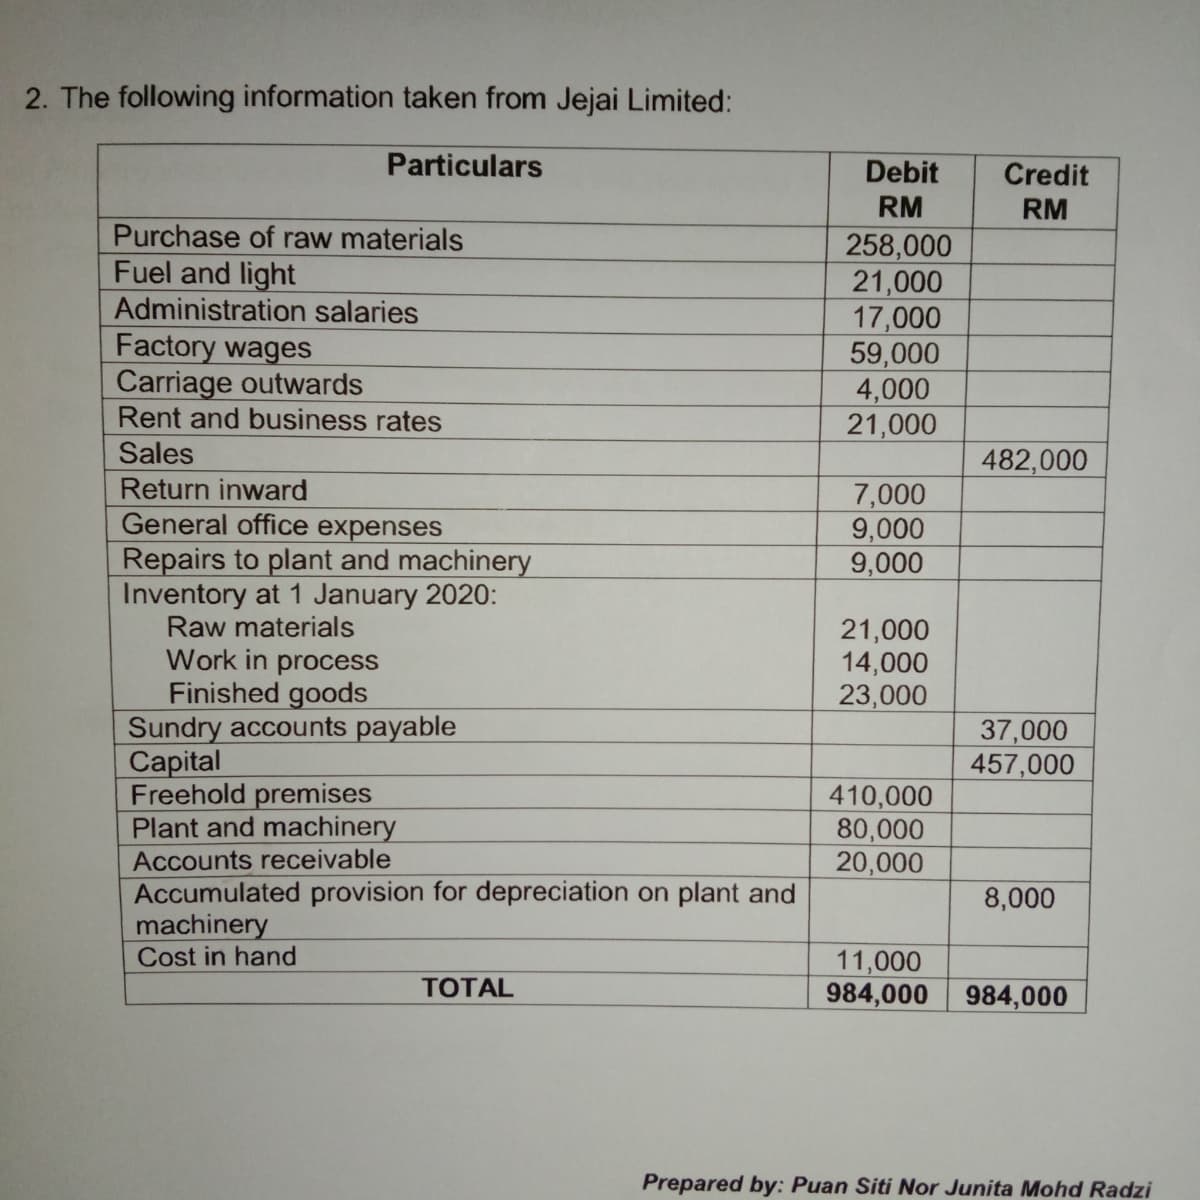 2. The following information taken from Jejai Limited:
Particulars
Debit
Credit
RM
RM
Purchase of raw materials
Fuel and light
Administration salaries
Factory wages
Carriage outwards
Rent and business rates
258,000
21,000
17,000
59,000
4,000
21,000
Sales
482,000
Return inward
General office expenses
Repairs to plant and machinery
Inventory at 1 January 2020:
Raw materials
7,000
9,000
9,000
21,000
14,000
23,000
Work in process
Finished goods
Sundry accounts payable
Capital
Freehold premises
Plant and machinery
Accounts receivable
Accumulated provision for depreciation on plant and
machinery
Cost in hand
37,000
457,000
410,000
80,000
20,000
8,000
11,000
984,000 984,000
TOTAL
Prepared by: Puan Siti Nor Junita Mohd Radzi
